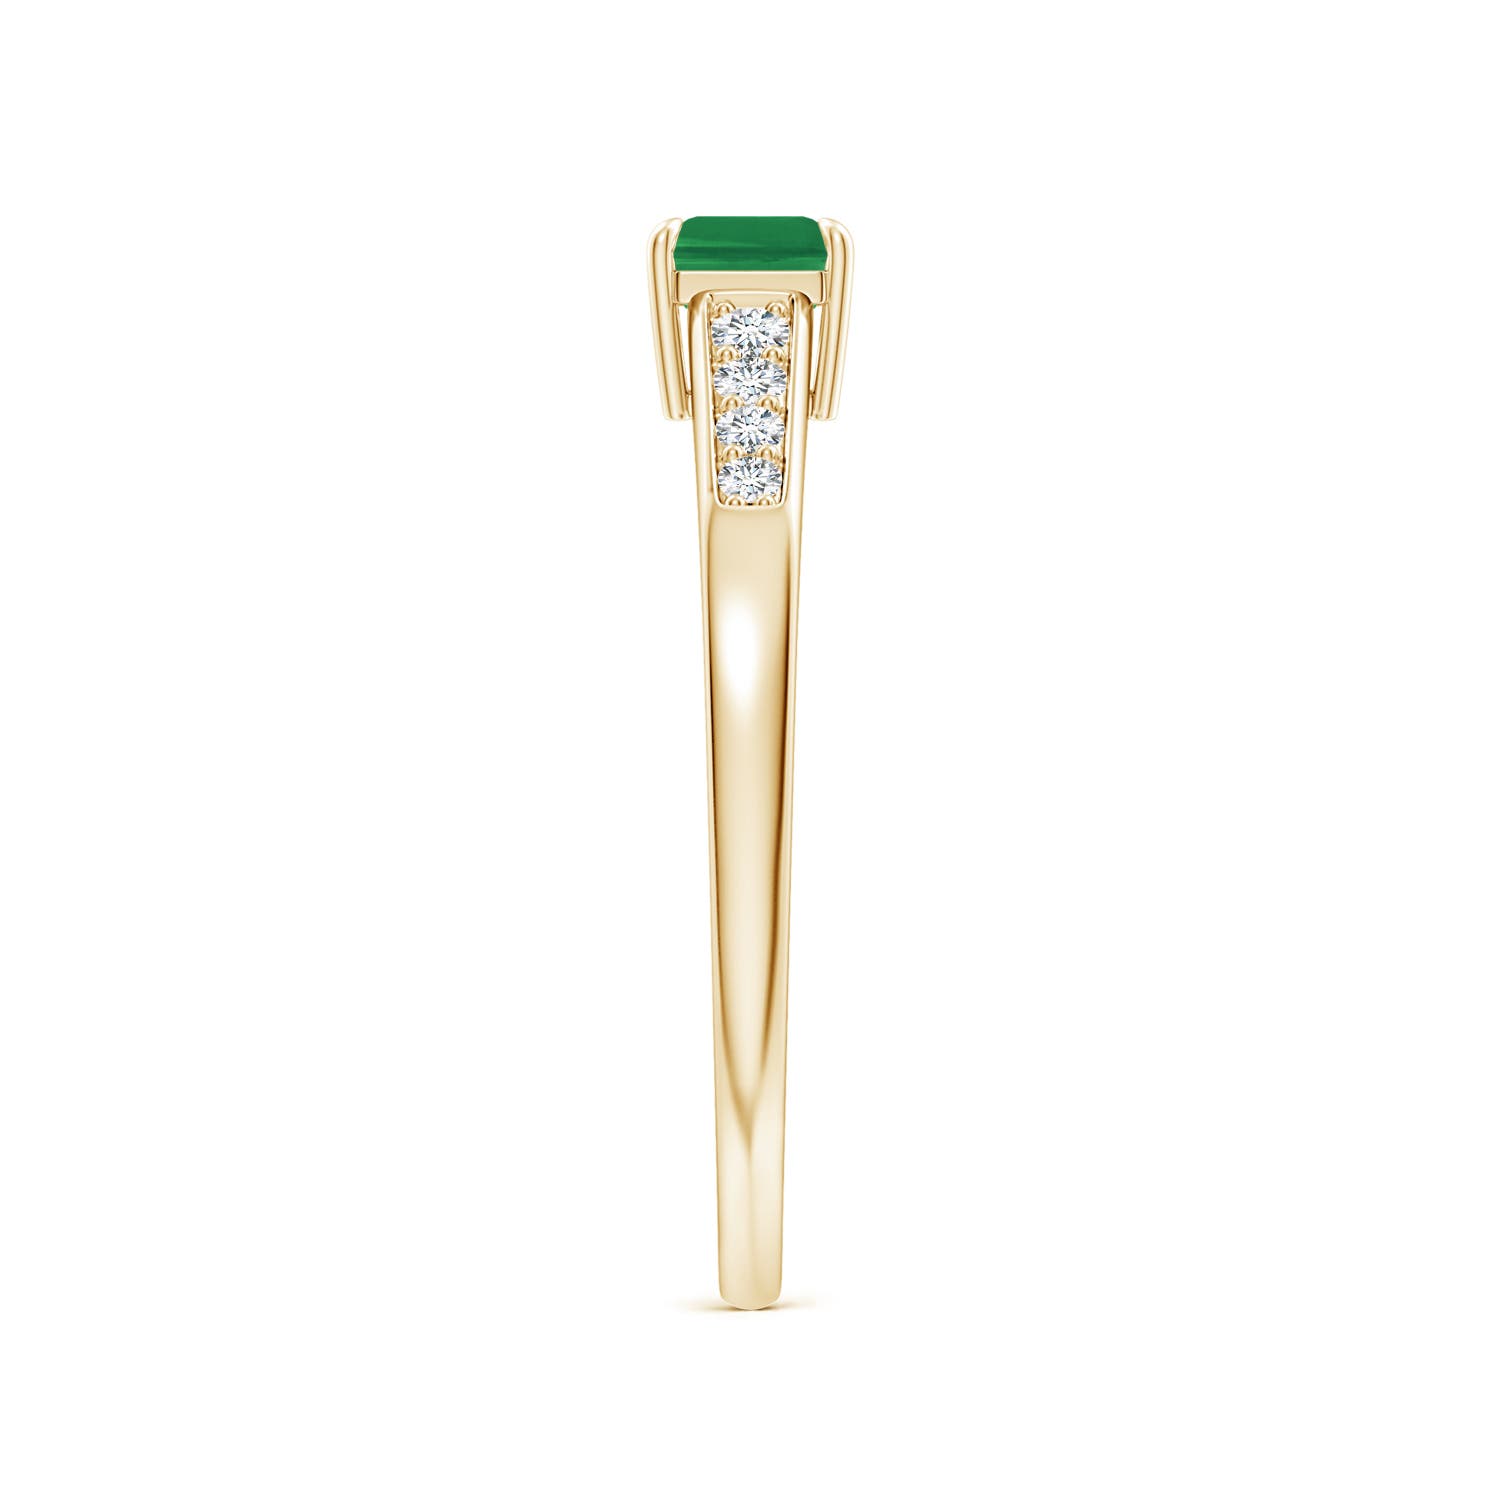 AA - Emerald / 0.61 CT / 14 KT Yellow Gold